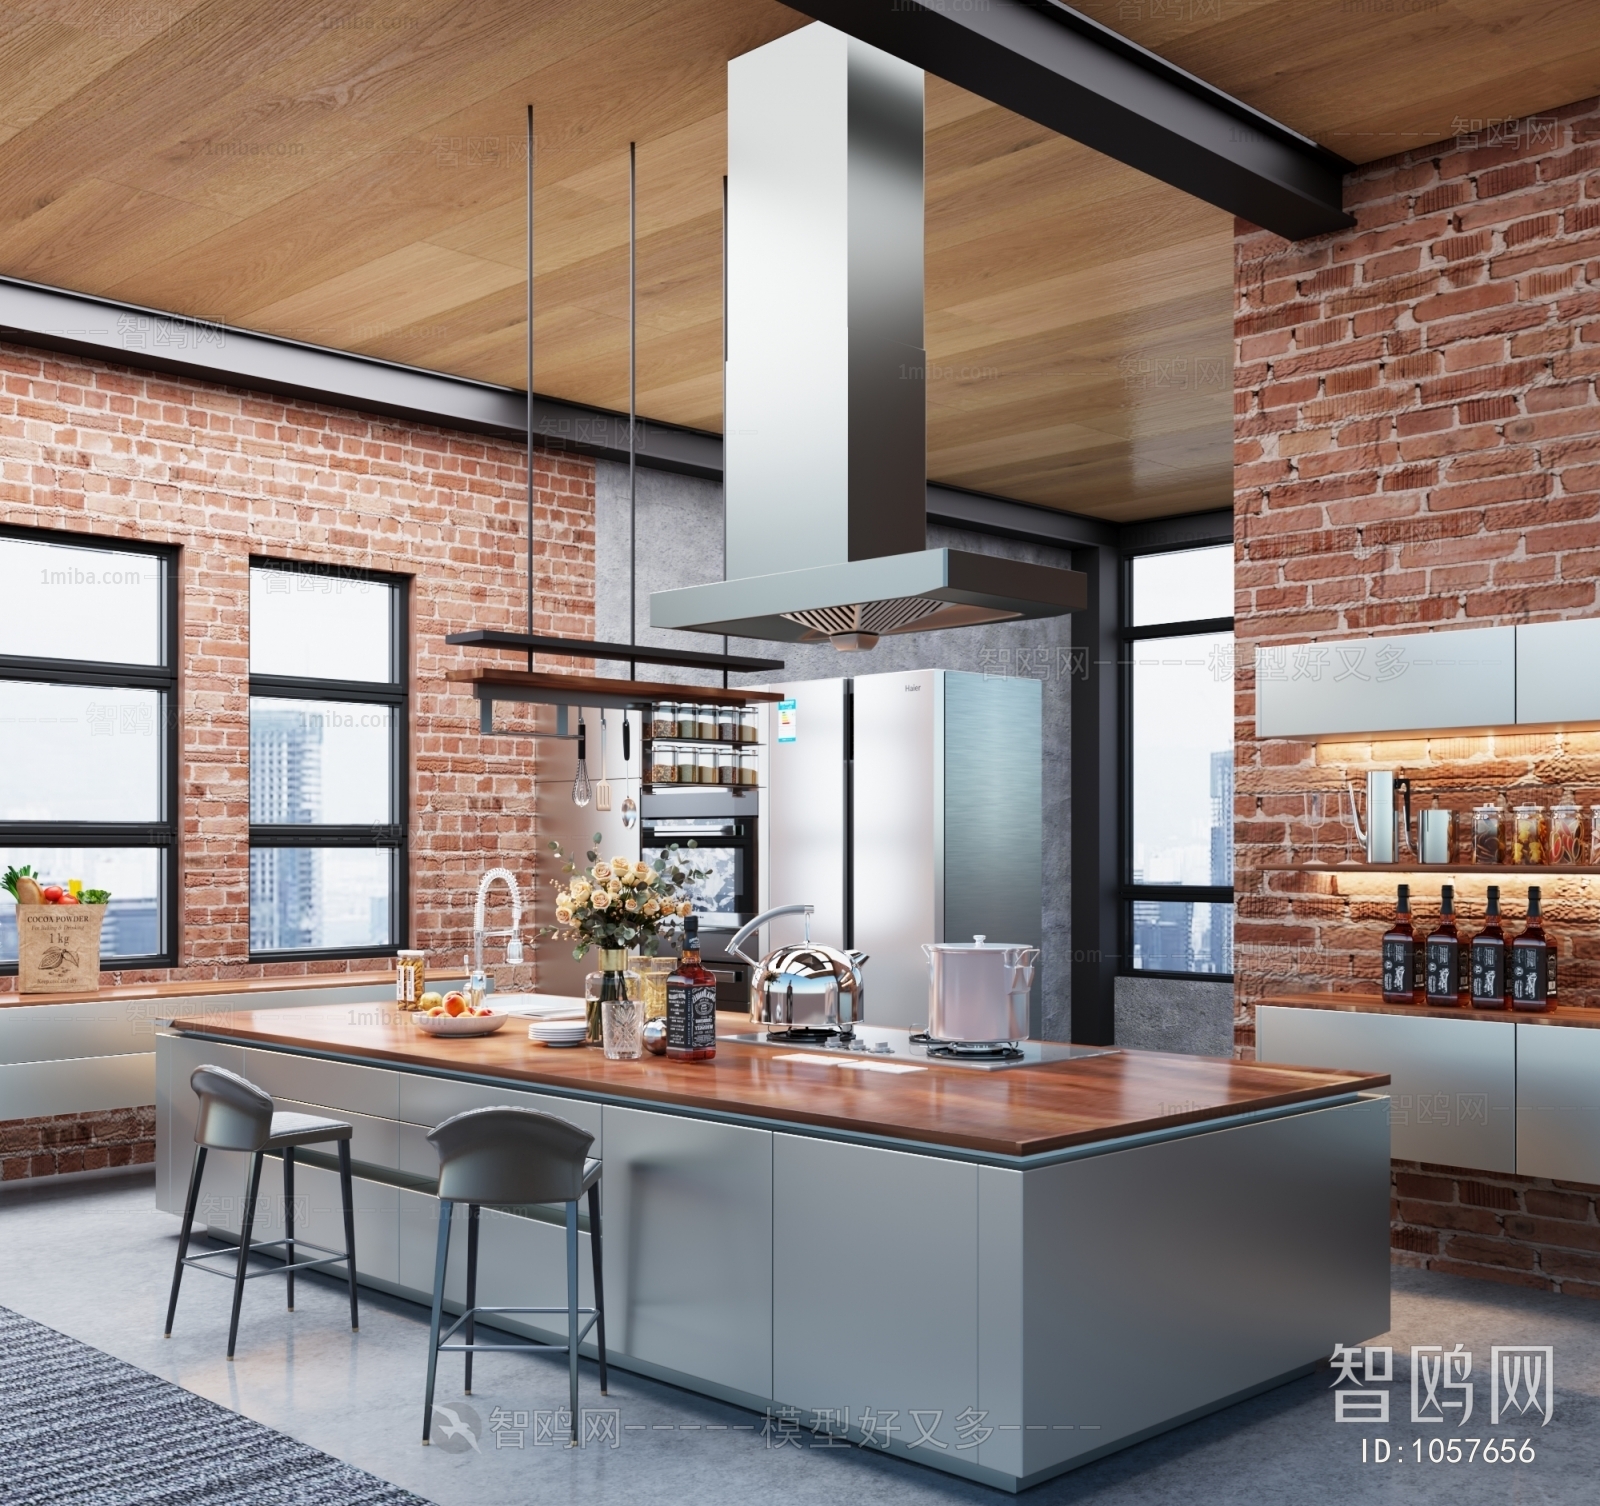 Industrial Style Central Kitchen